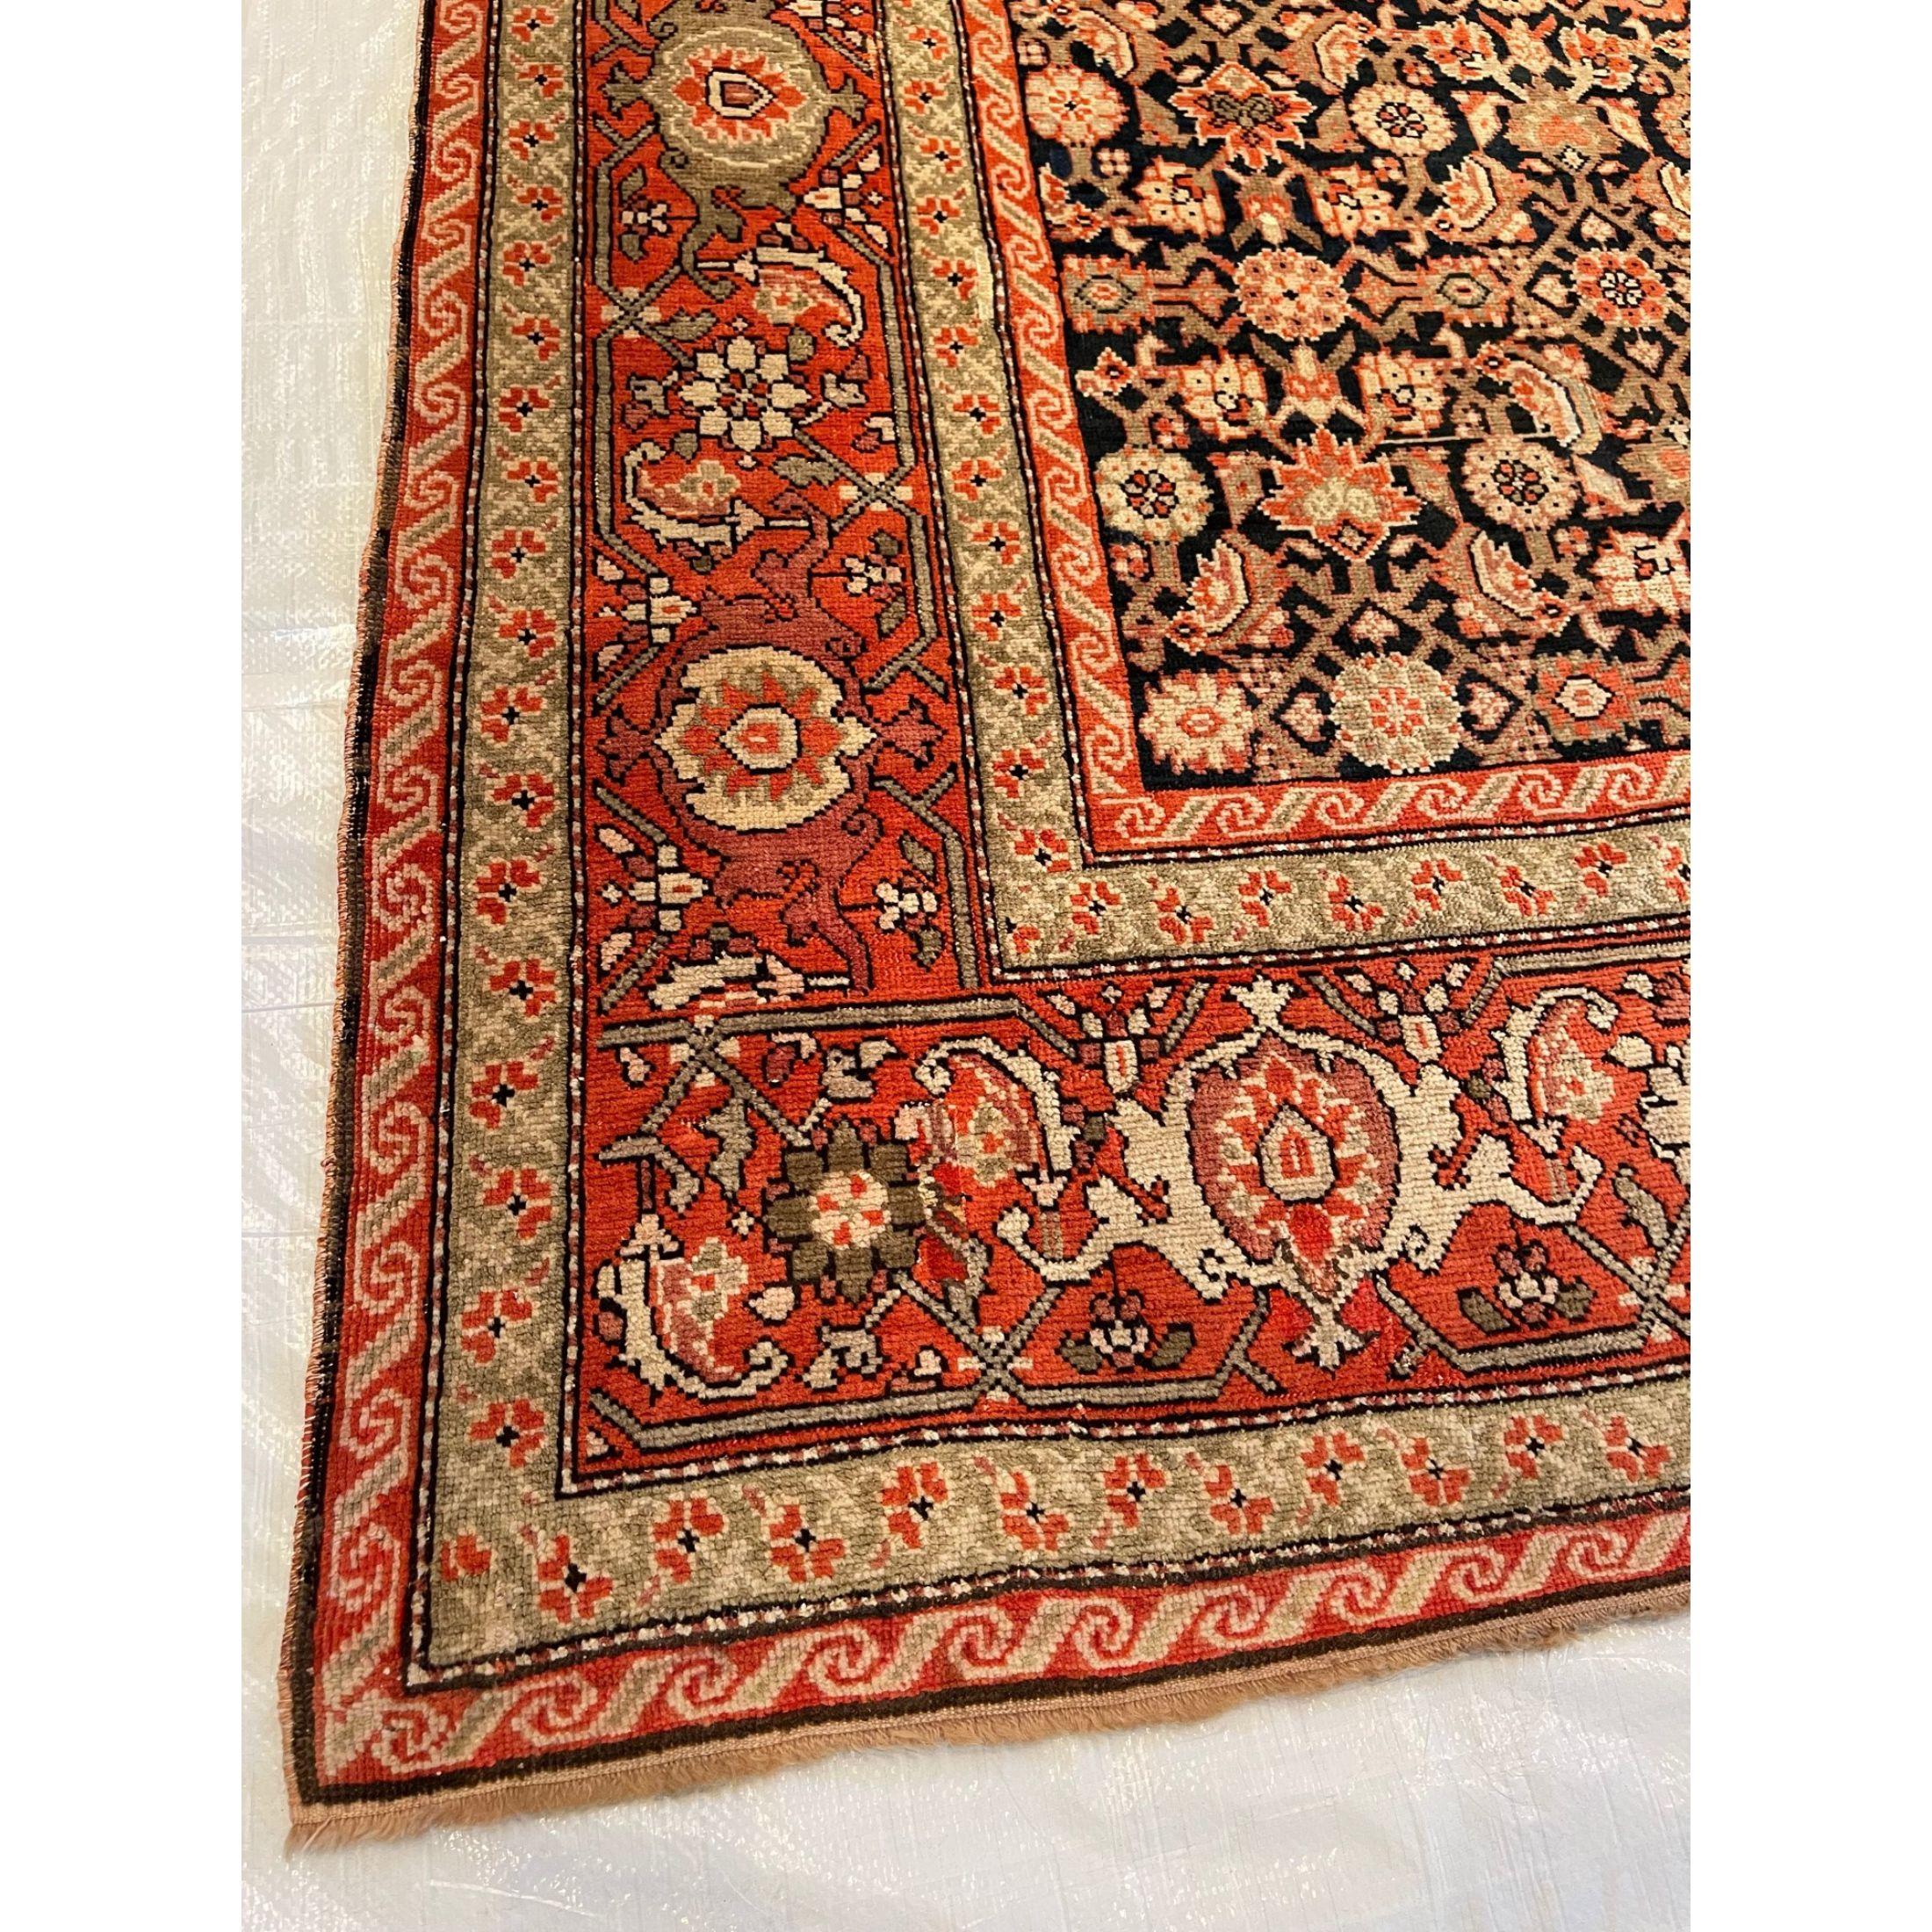 Antique Karabagh rugs Eagerly sought after by collectors as well as designers, have one of the oldest and most varied design traditions of any antique Caucasian rugs. Many are descended from the classical Caucasian carpets of the eighteenth century.